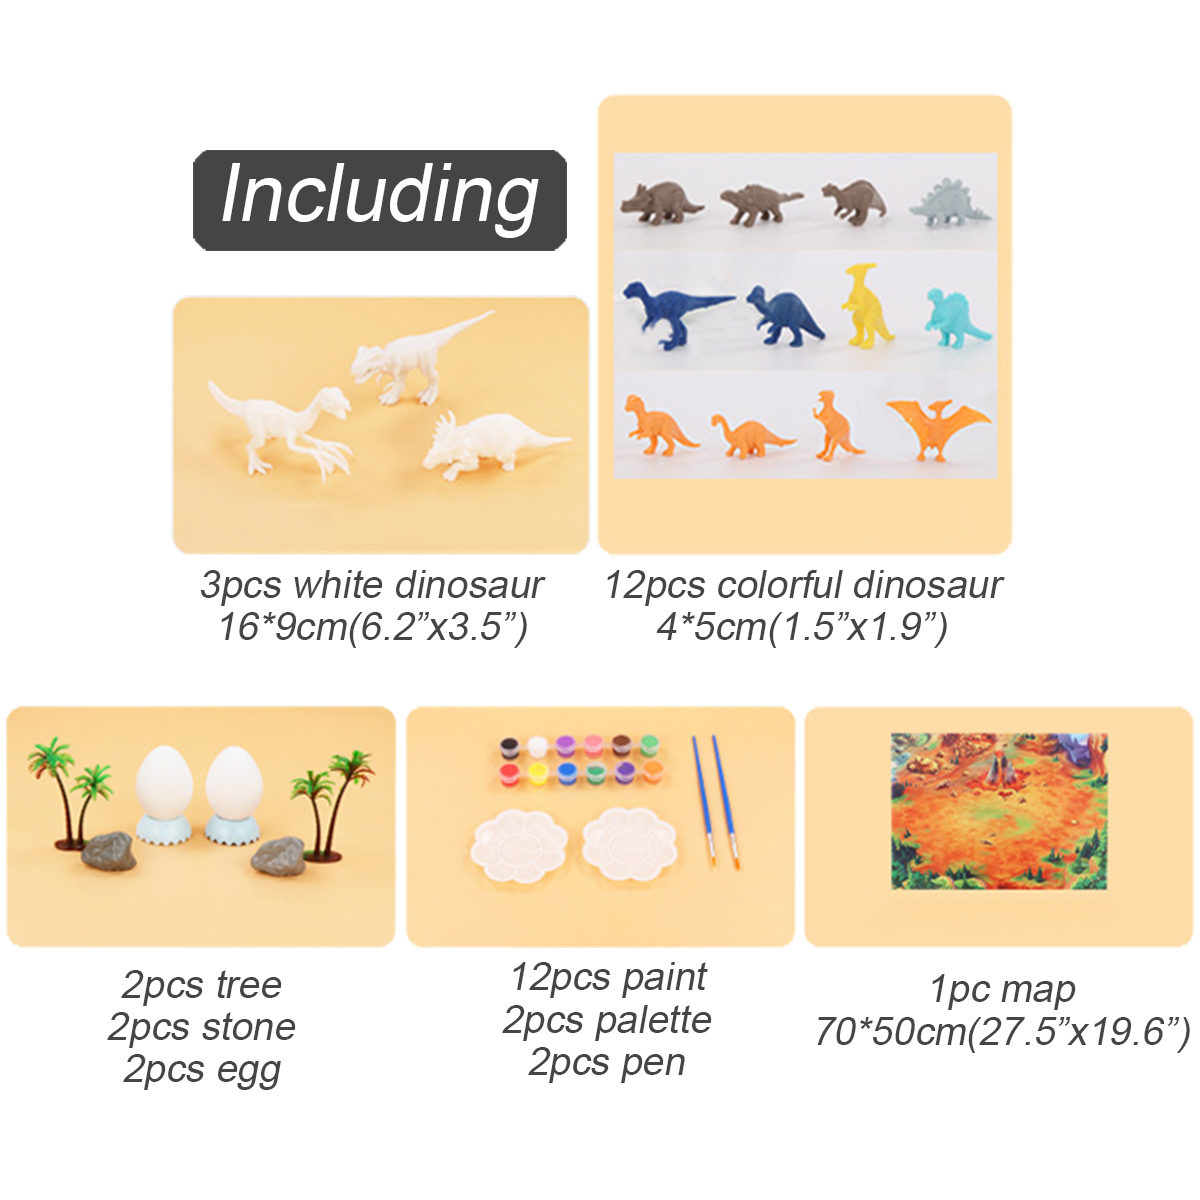 38Pcs-Jungle-Wildlife-Animal-Diecast-Dinosaur-Model-Puzzle-Drawing-Early-Education-Set-Toy-for-Kids--1737864-9